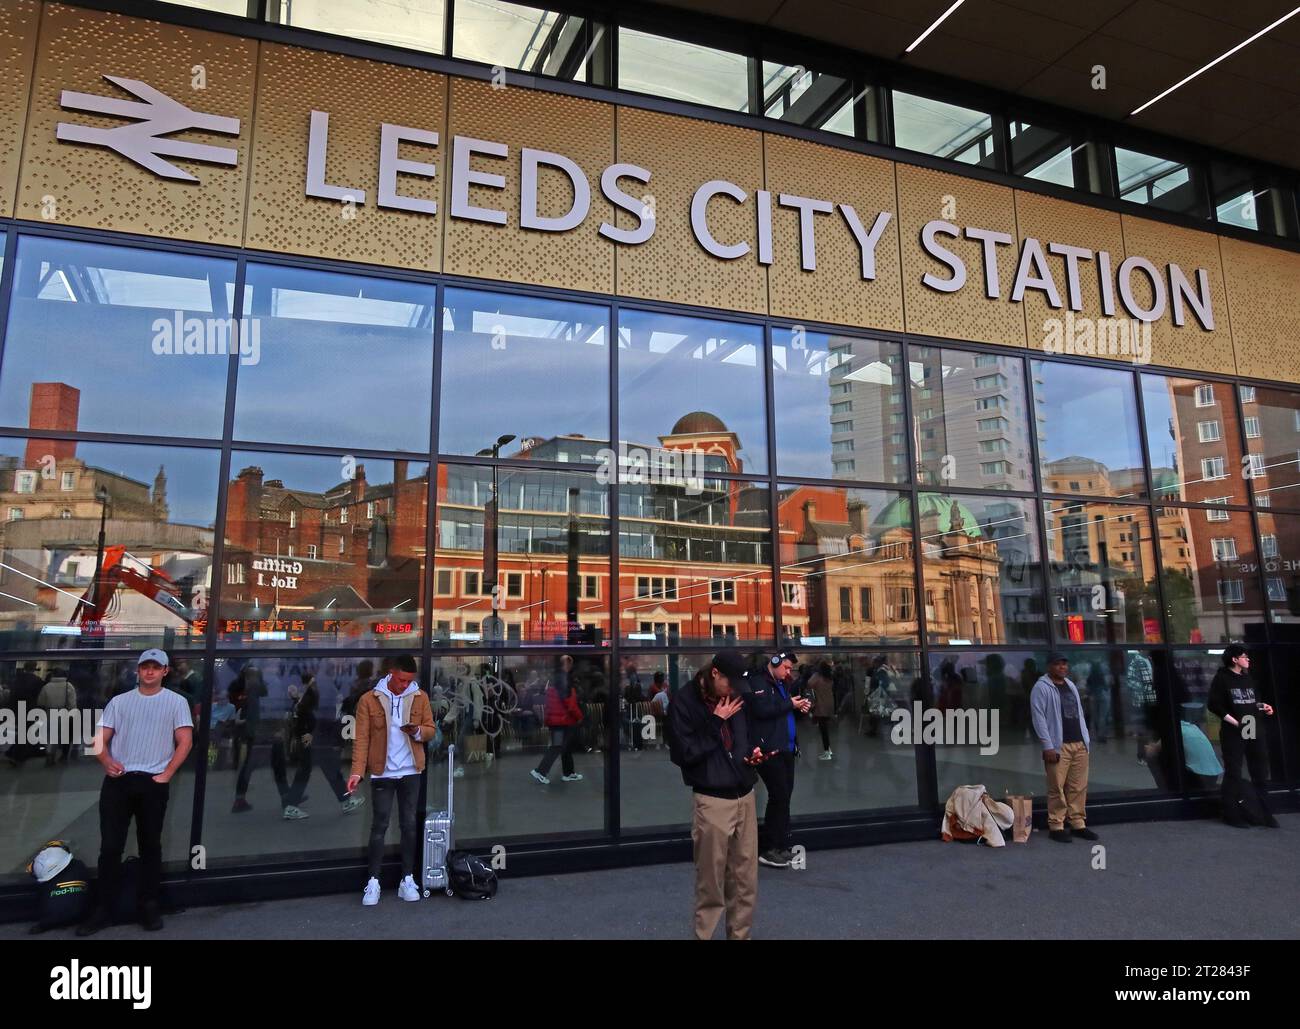 Main entrance 2023 with cityscape reflection, outside Leeds City Station at New Station St, Leeds, Yorkshire, England, LS1 4DY Stock Photo